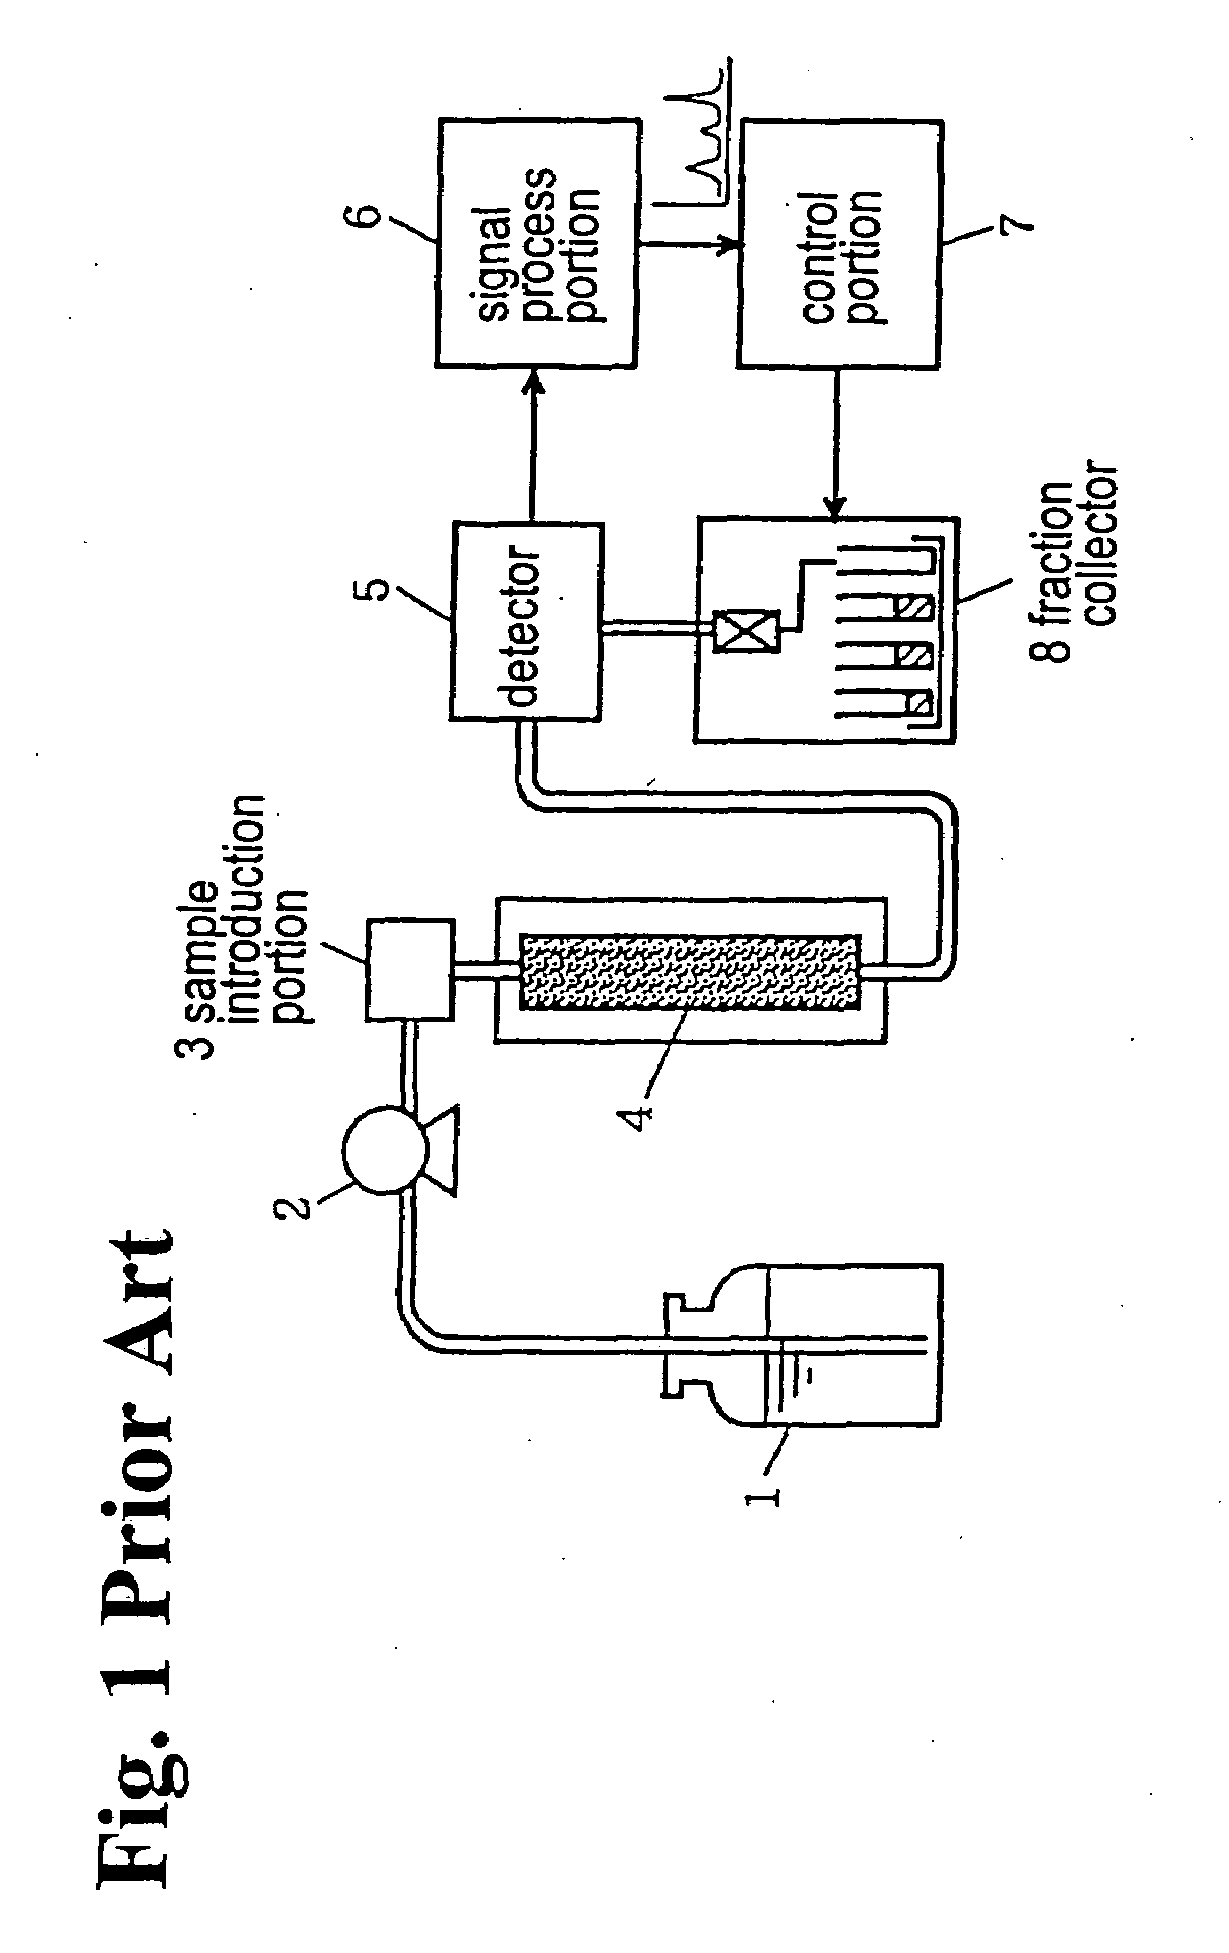 Method for fractionating various components contained in a sample solution by liquid chromatograph mass spectrometer